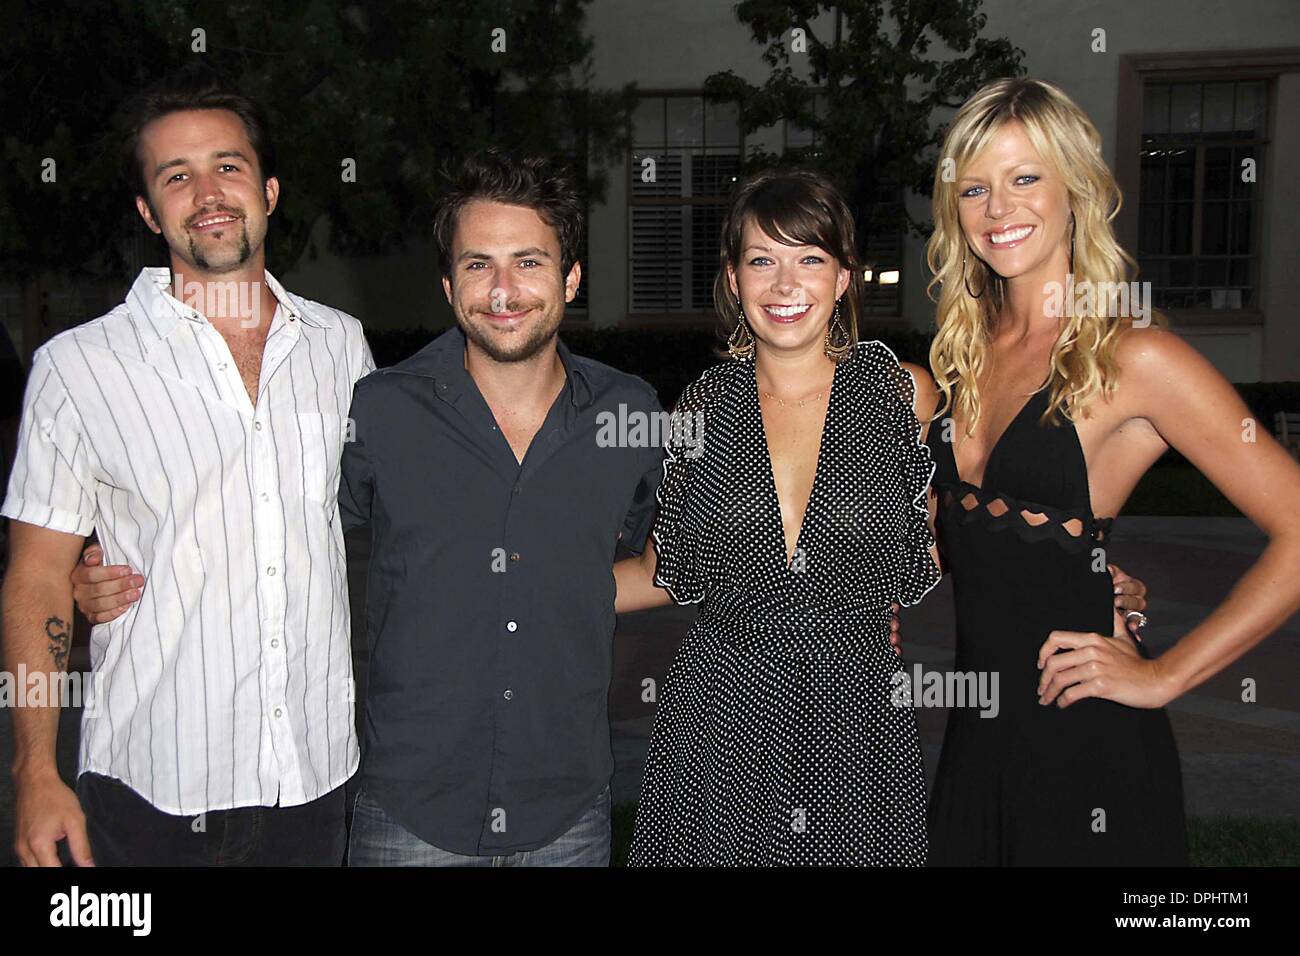 Aug. 25, 2006 - Hollywood, California, U.S. - LOS ANGELES, CA AUGUST 25, 2006 (SSI) - -.Actors Rob McElhenny, Charlie Day, actresses Mary Elizabeth Ellis and Kaitlin Olson during the Season Four Premiere Screening of NIP/TUCK, held at the Paramount Theater, on August 25, 2006, Paramount Studios, Los Angeles.   / Super Star Images.K49433MG.NIP/ TUCK SEASON FOUR PREMIERE SCREENING WA Stock Photo